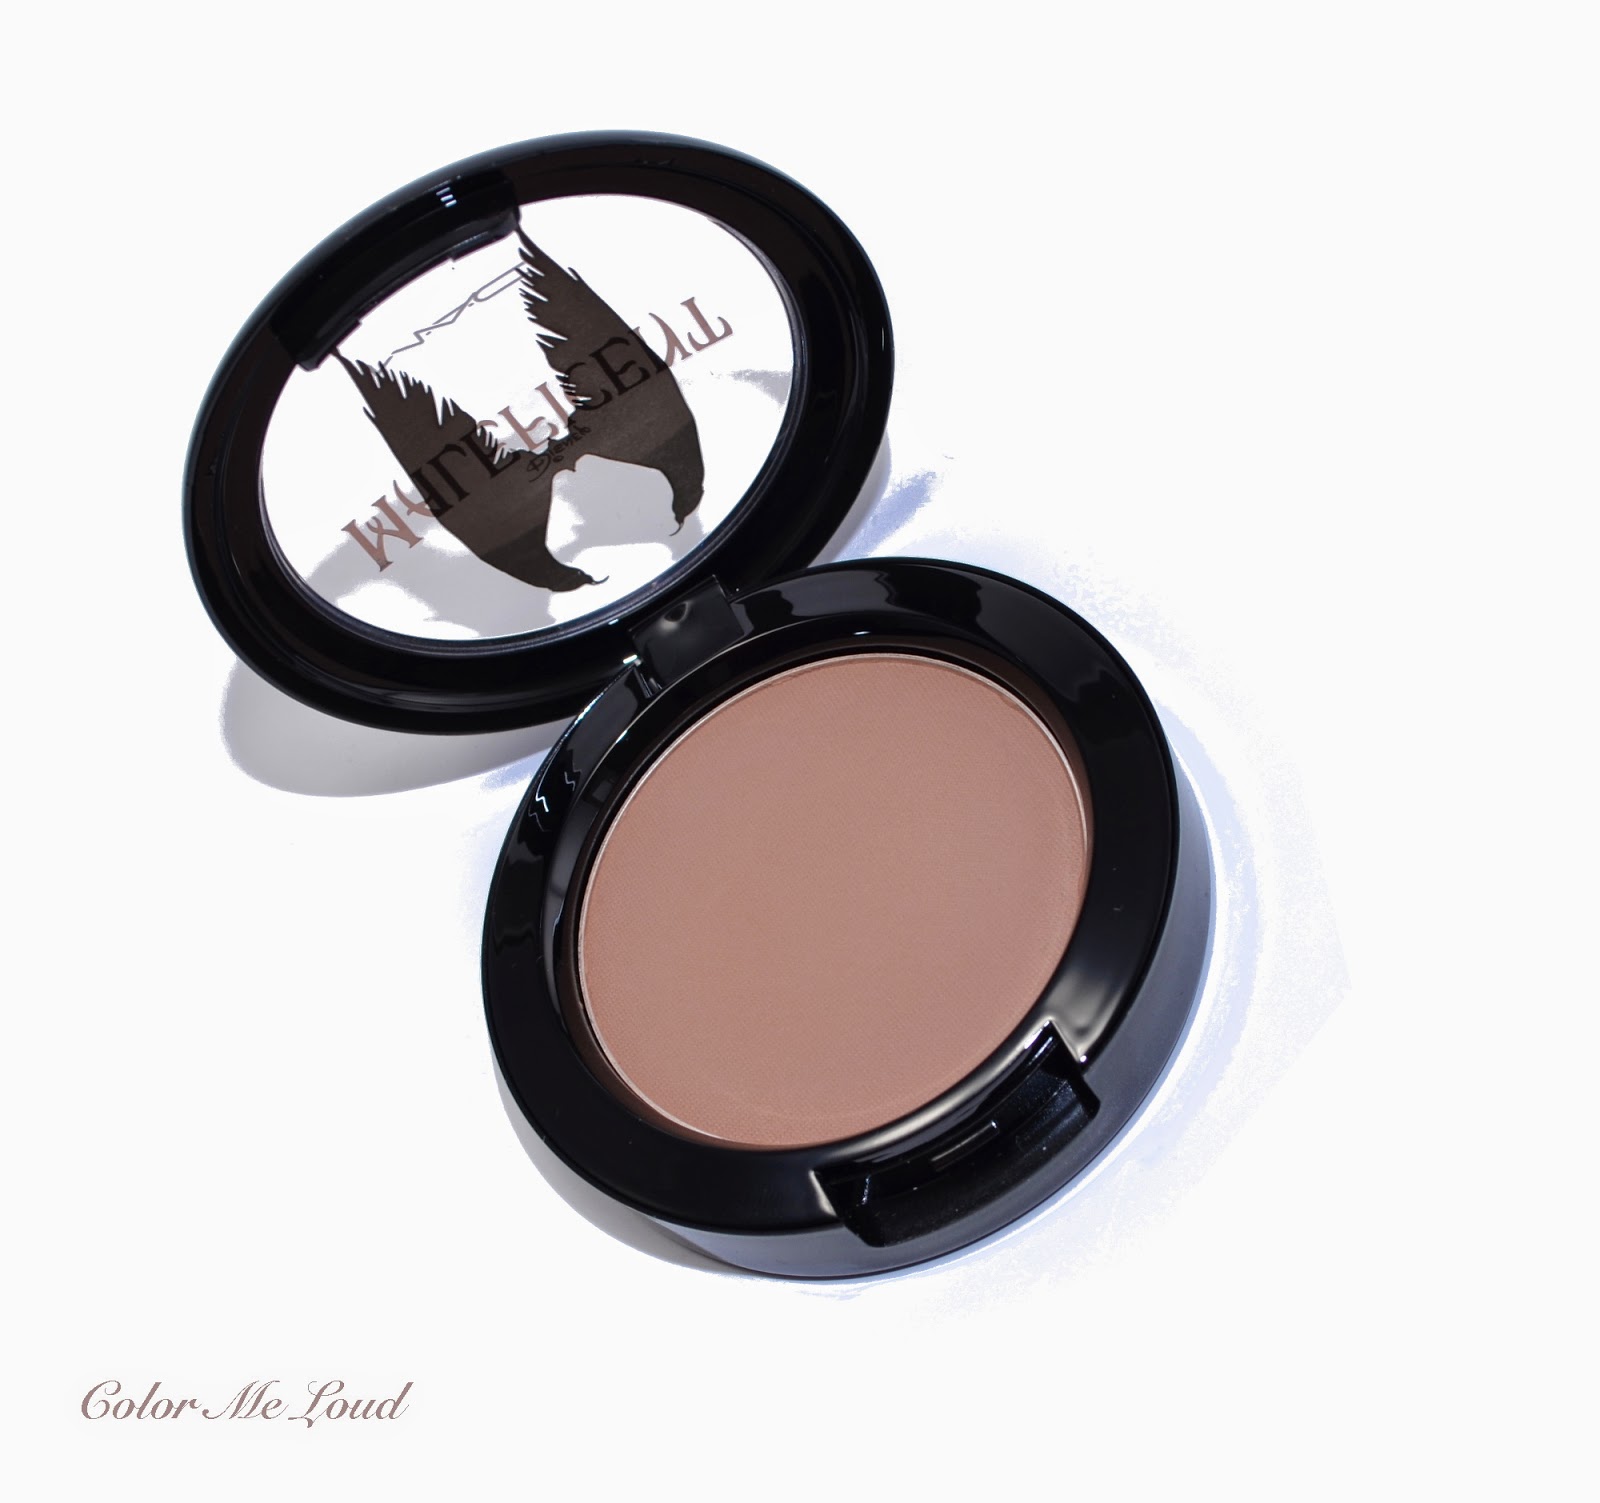 MAC Sculpting Powder in Sculpt from Maleficent Collection, Review, Swatch & Comparison